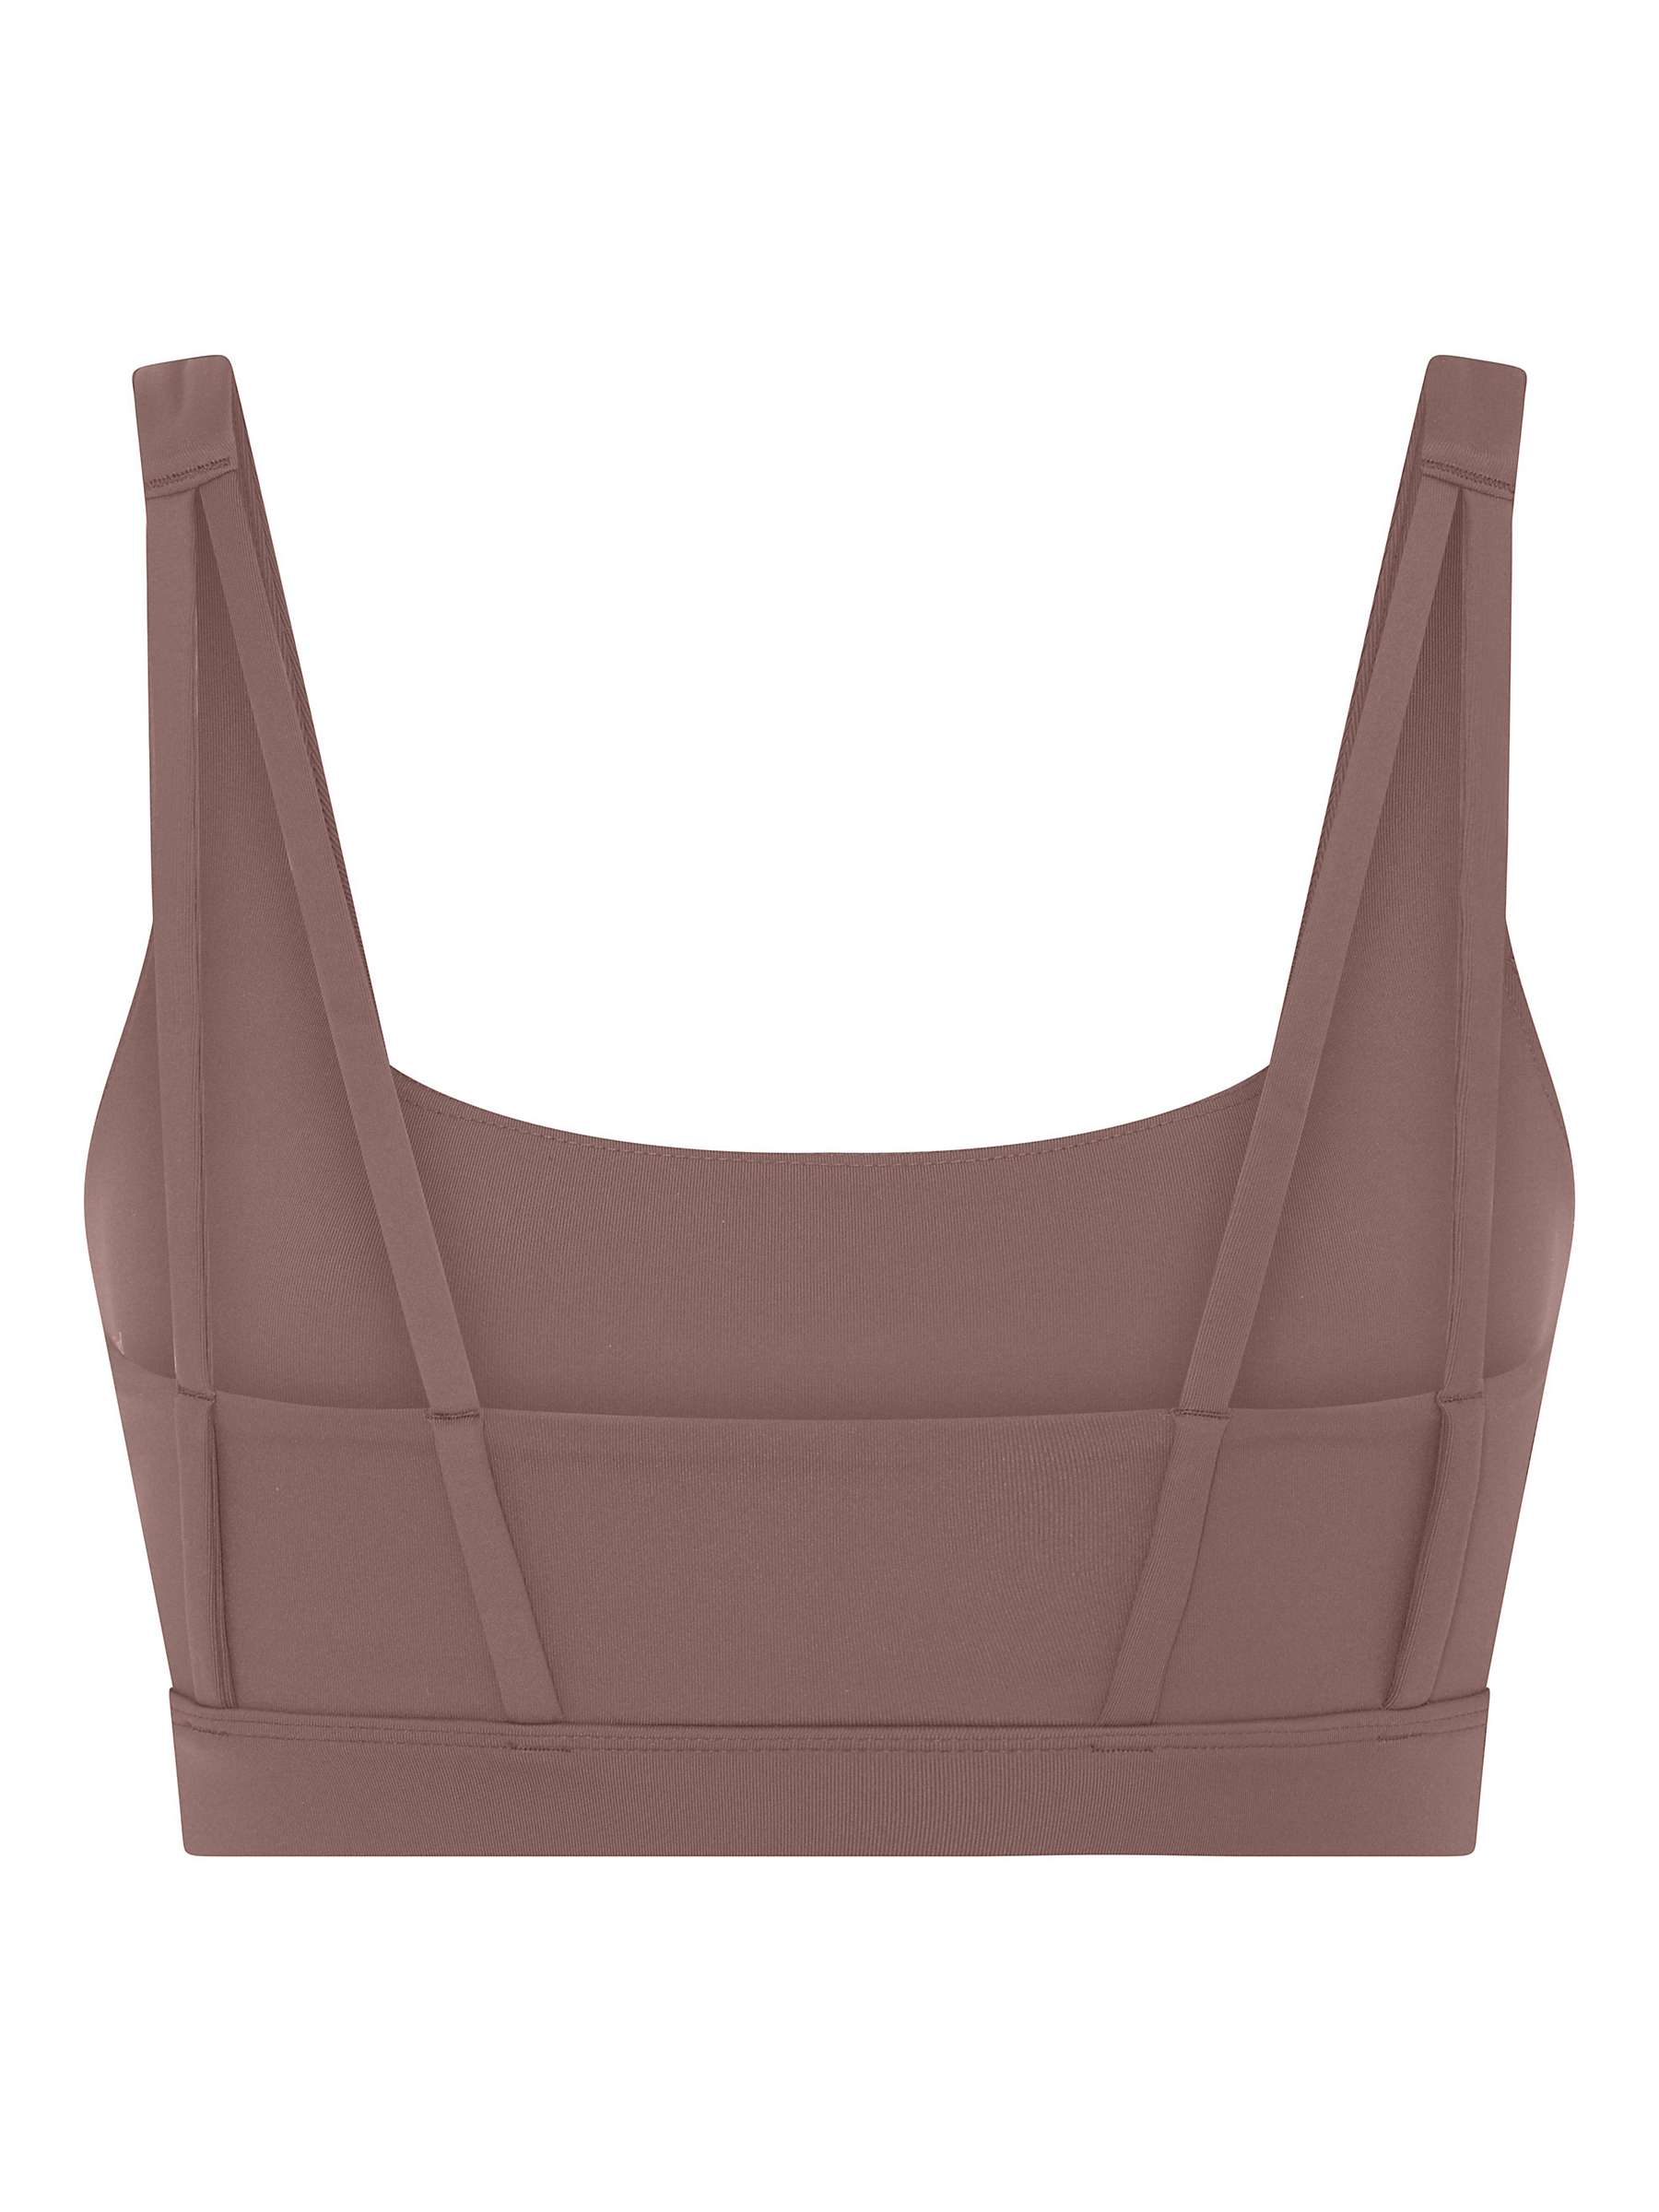 Buy Girlfriend Collective Compression Sports Bra, Porcini Online at johnlewis.com